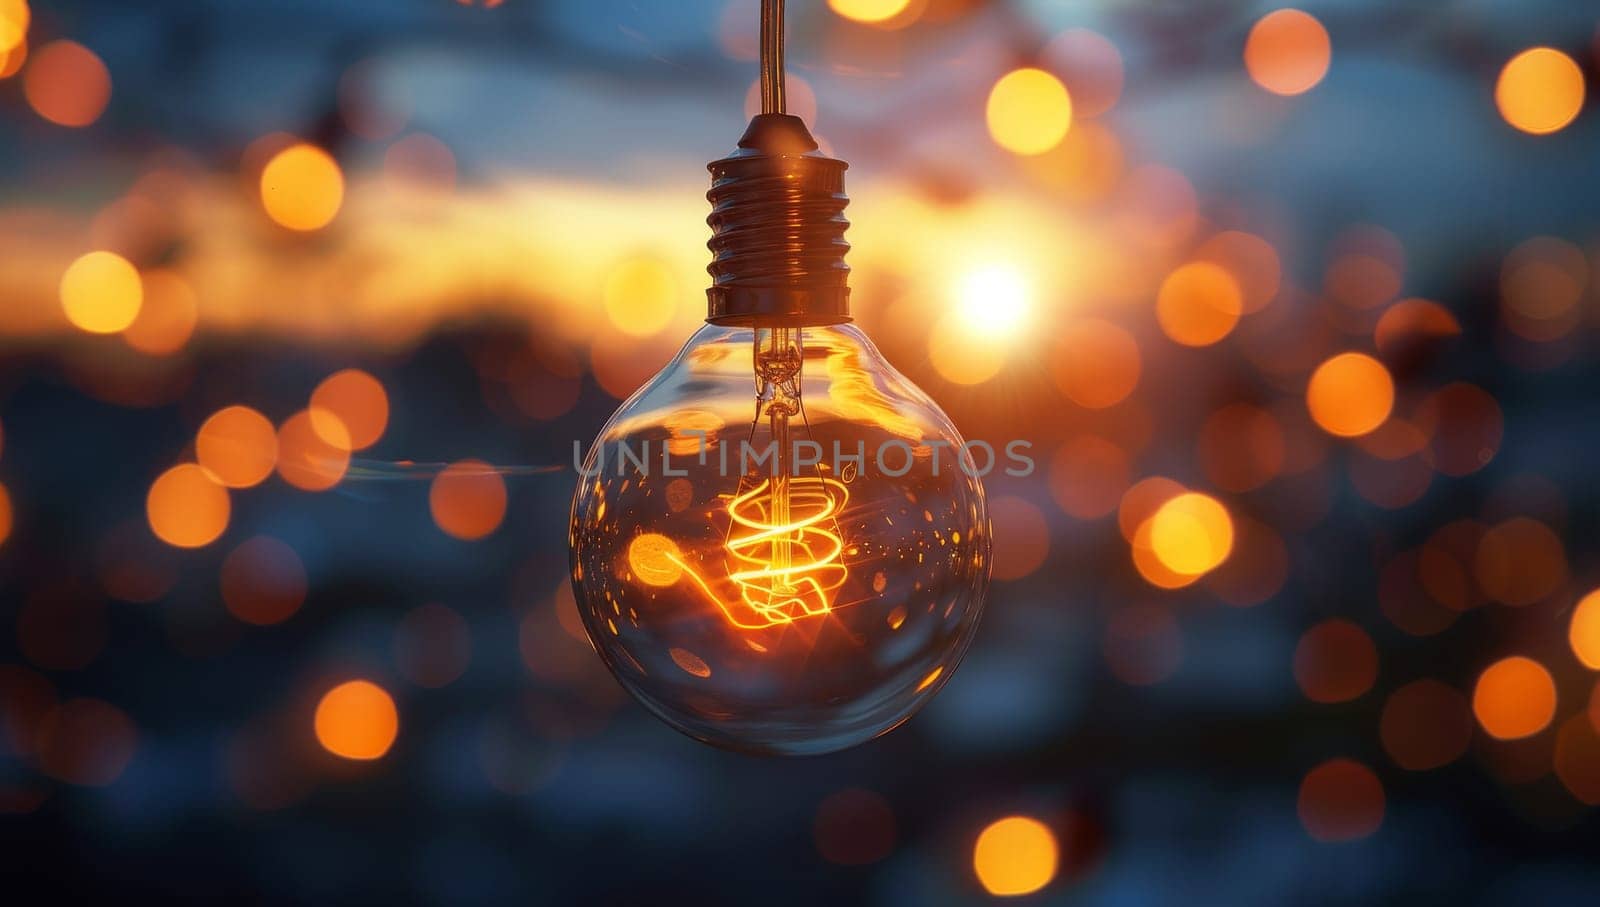 Vintage light bulb on bokeh background with copy space.